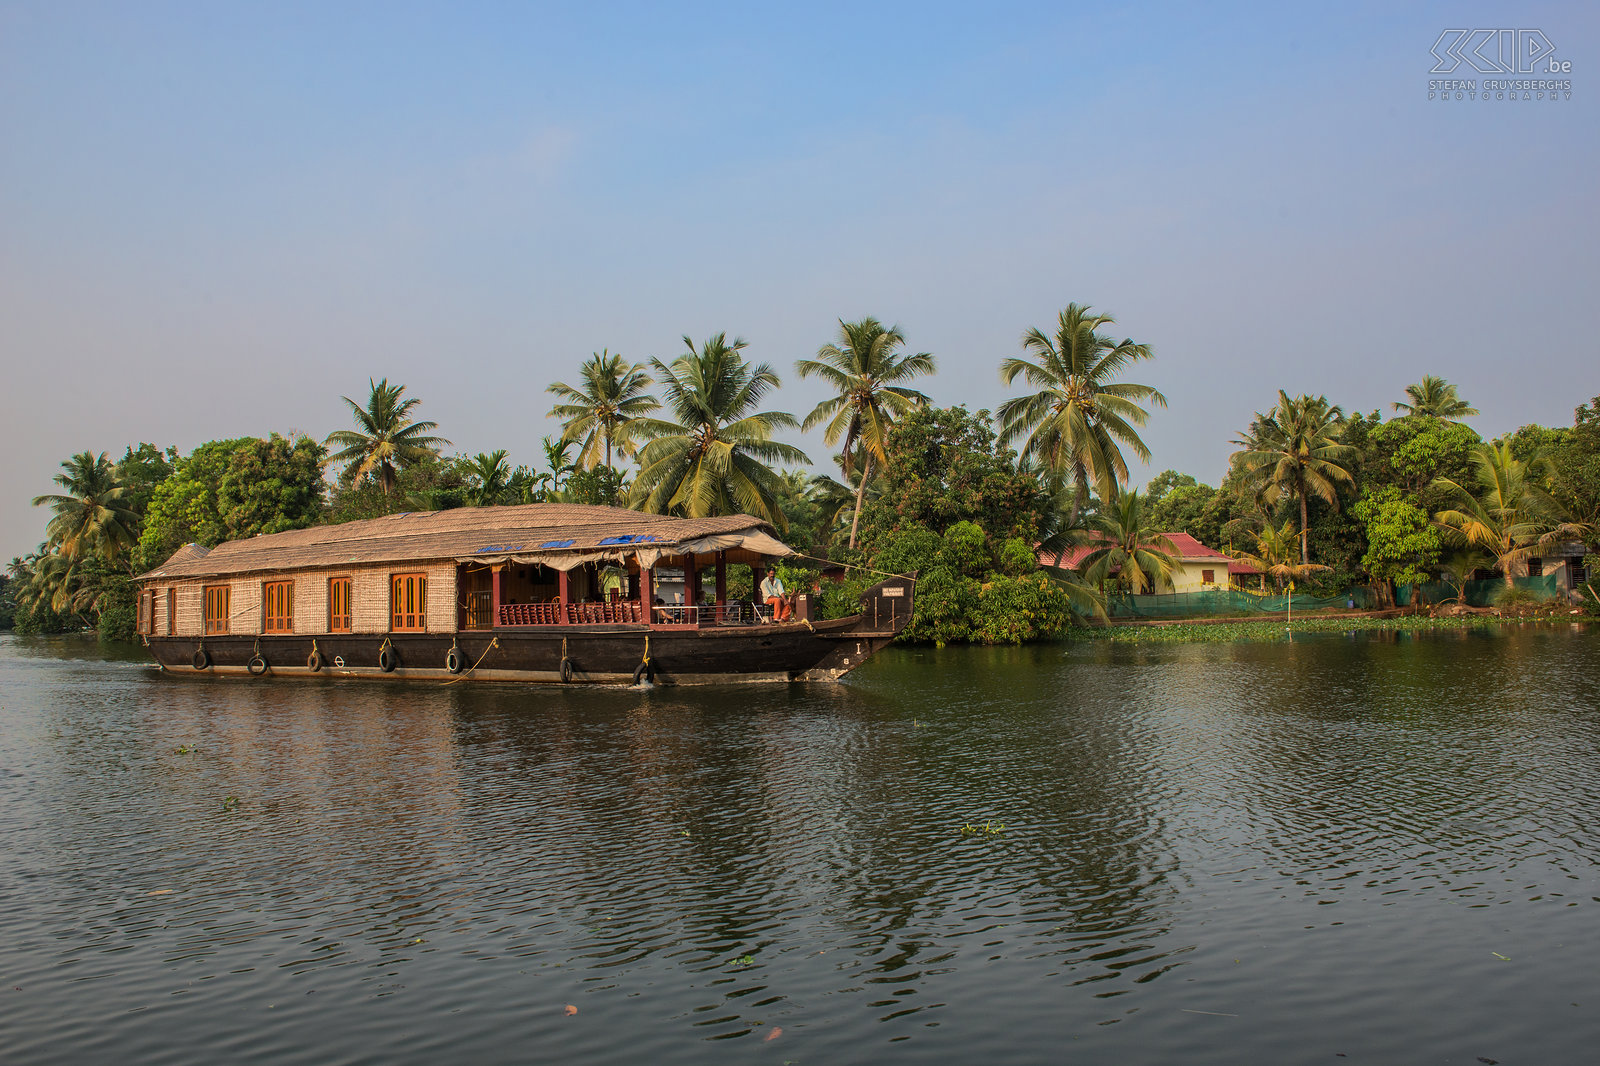 Backwaters Kerala - Houseboat The tourist houseboats look like the traditional kettuvallams which were used to transport the rice and grains to the harbors.  Stefan Cruysberghs